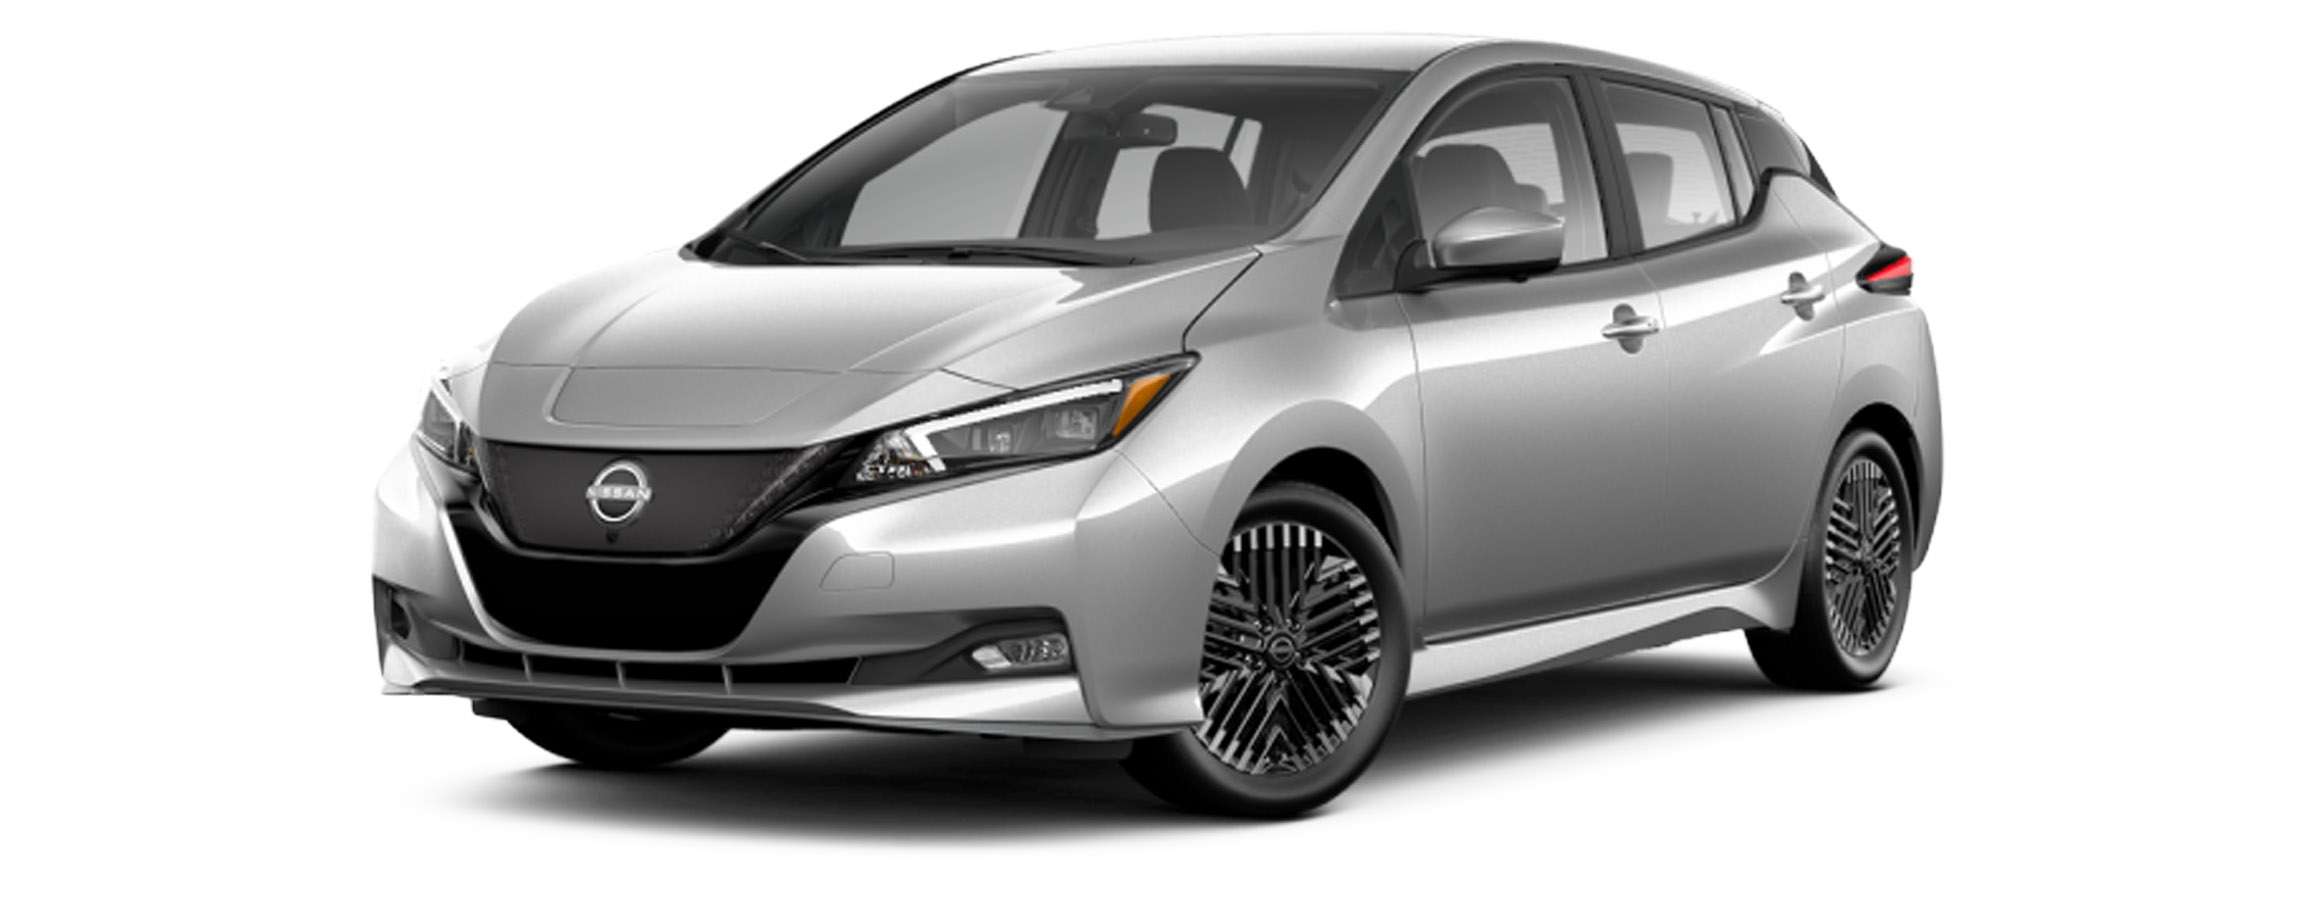 Lease your new 2024 Nissan LEAF today!